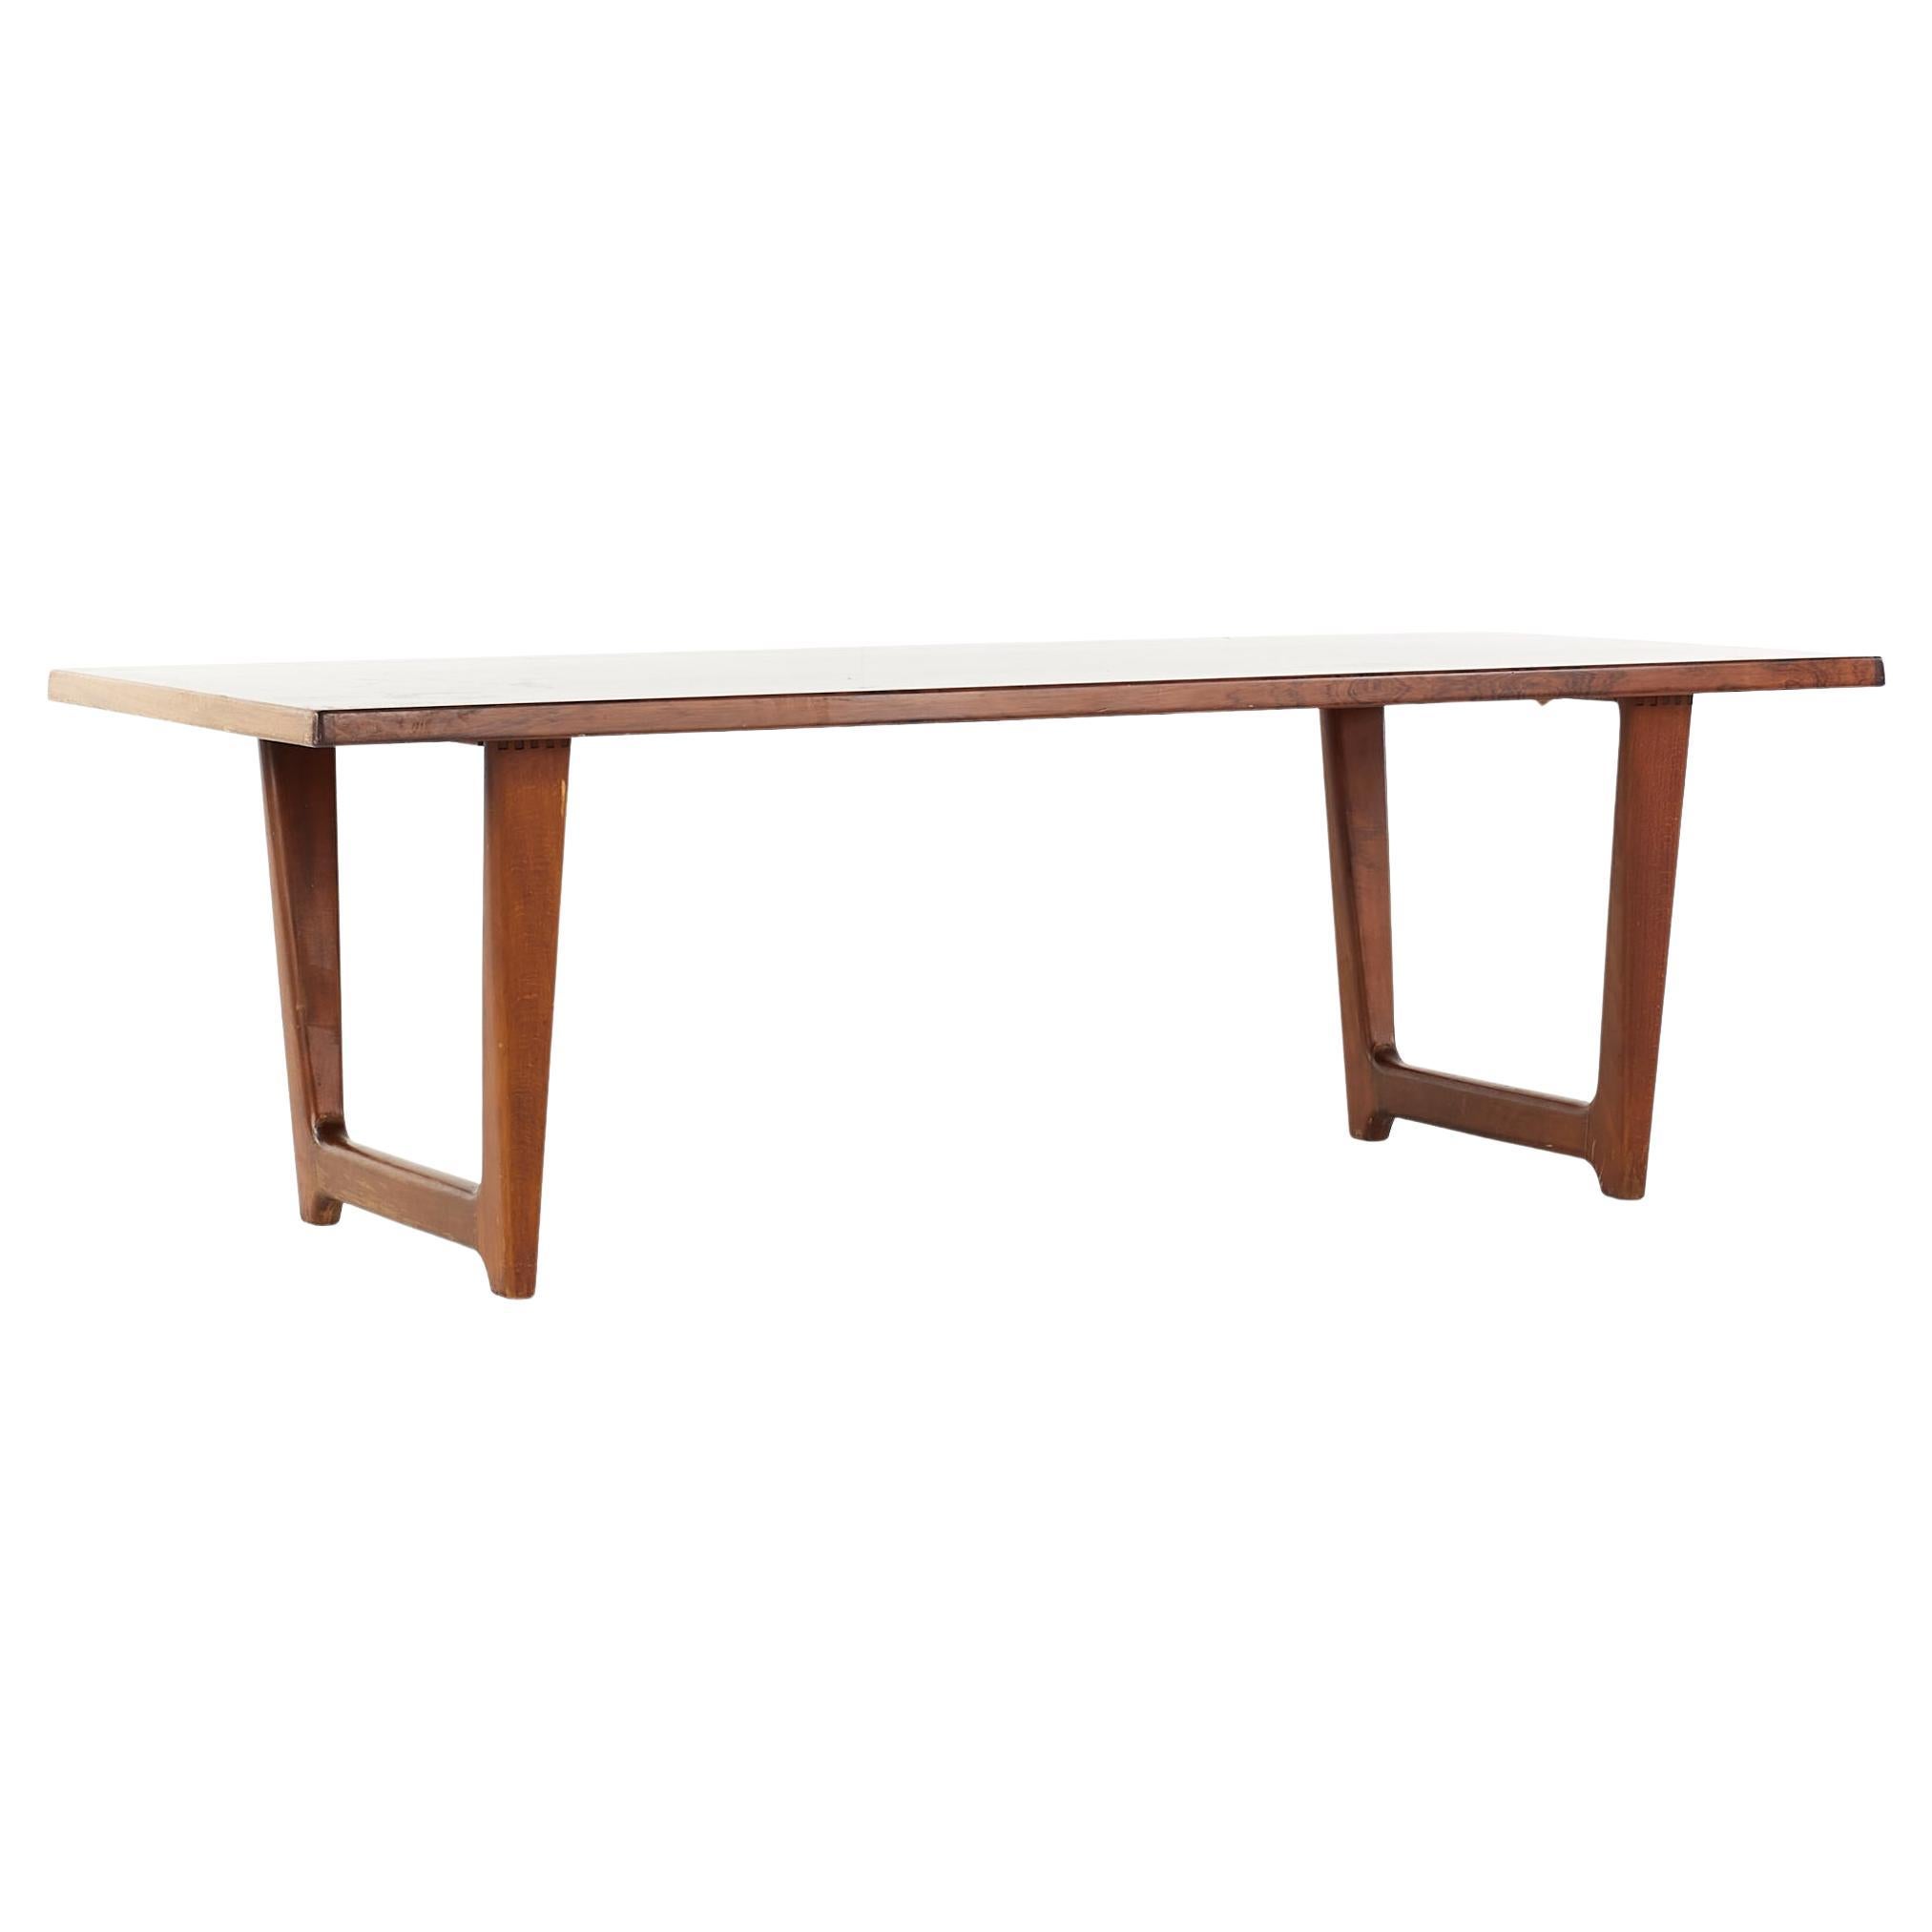 Sold 1.30.24 Peter Hvidt Style Mid Century Danish Rosewood Coffee Table